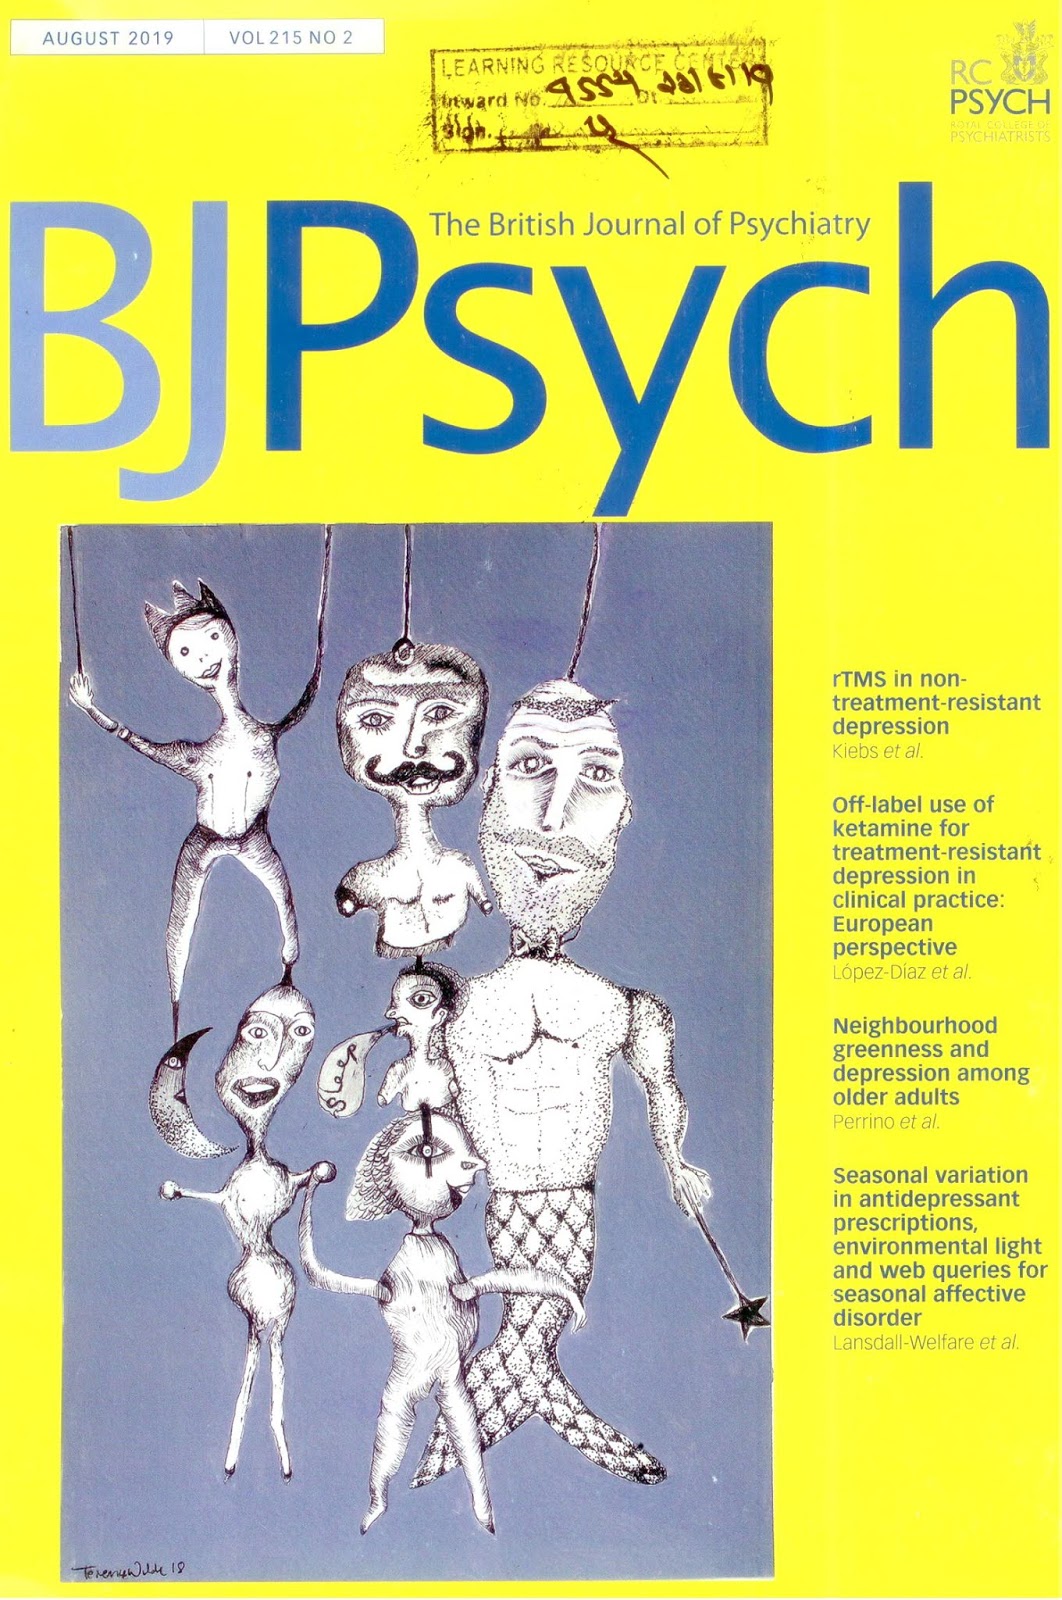 https://www.cambridge.org/core/journals/the-british-journal-of-psychiatry/issue/149454BF51478577C7050ADB20DFC6A1